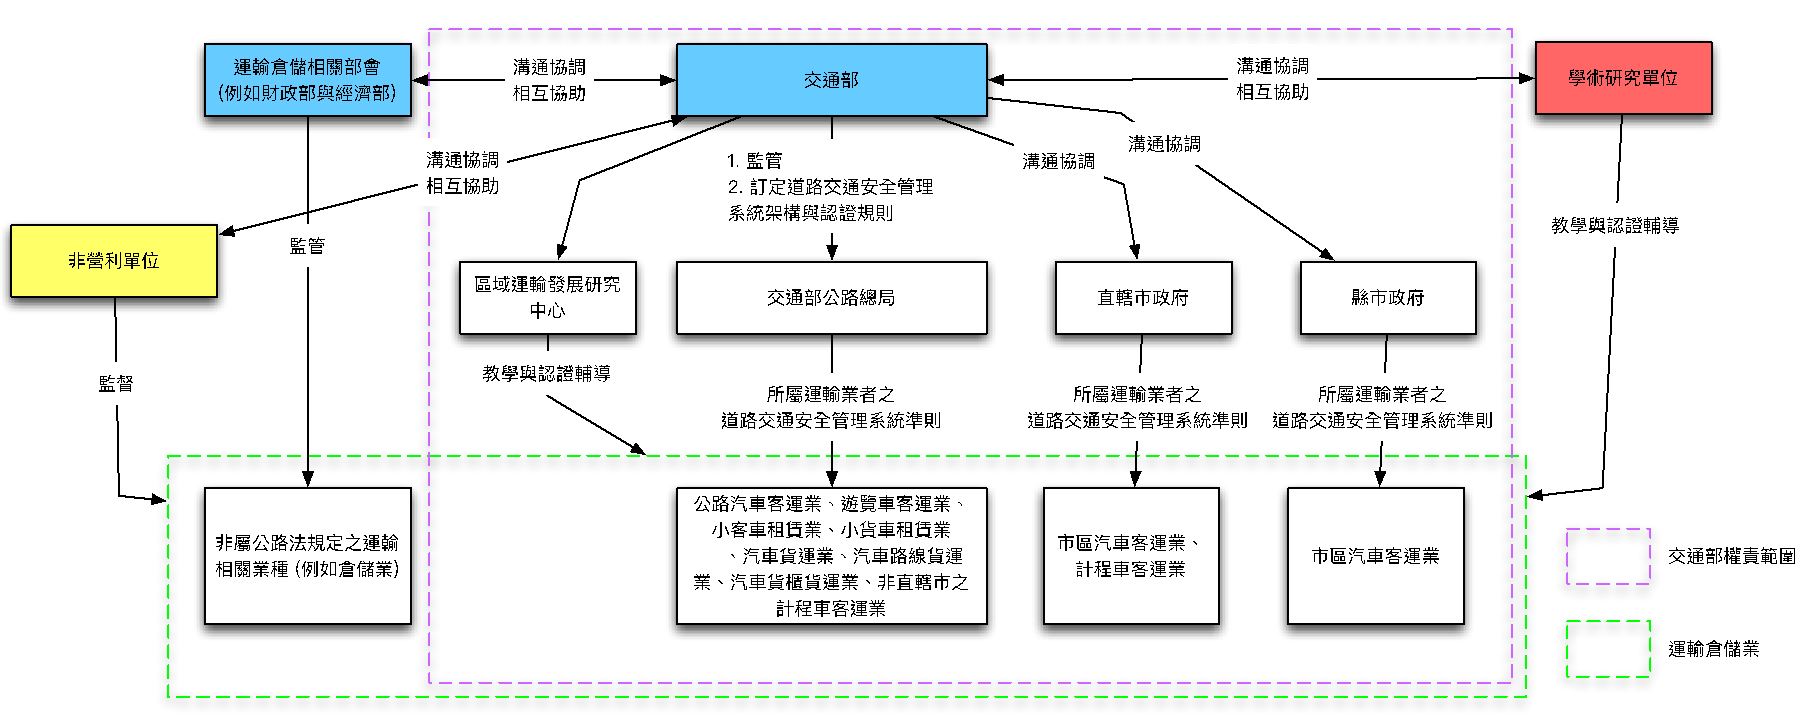 Relationships between different units in promoting the Road Transportation Safety Management System.